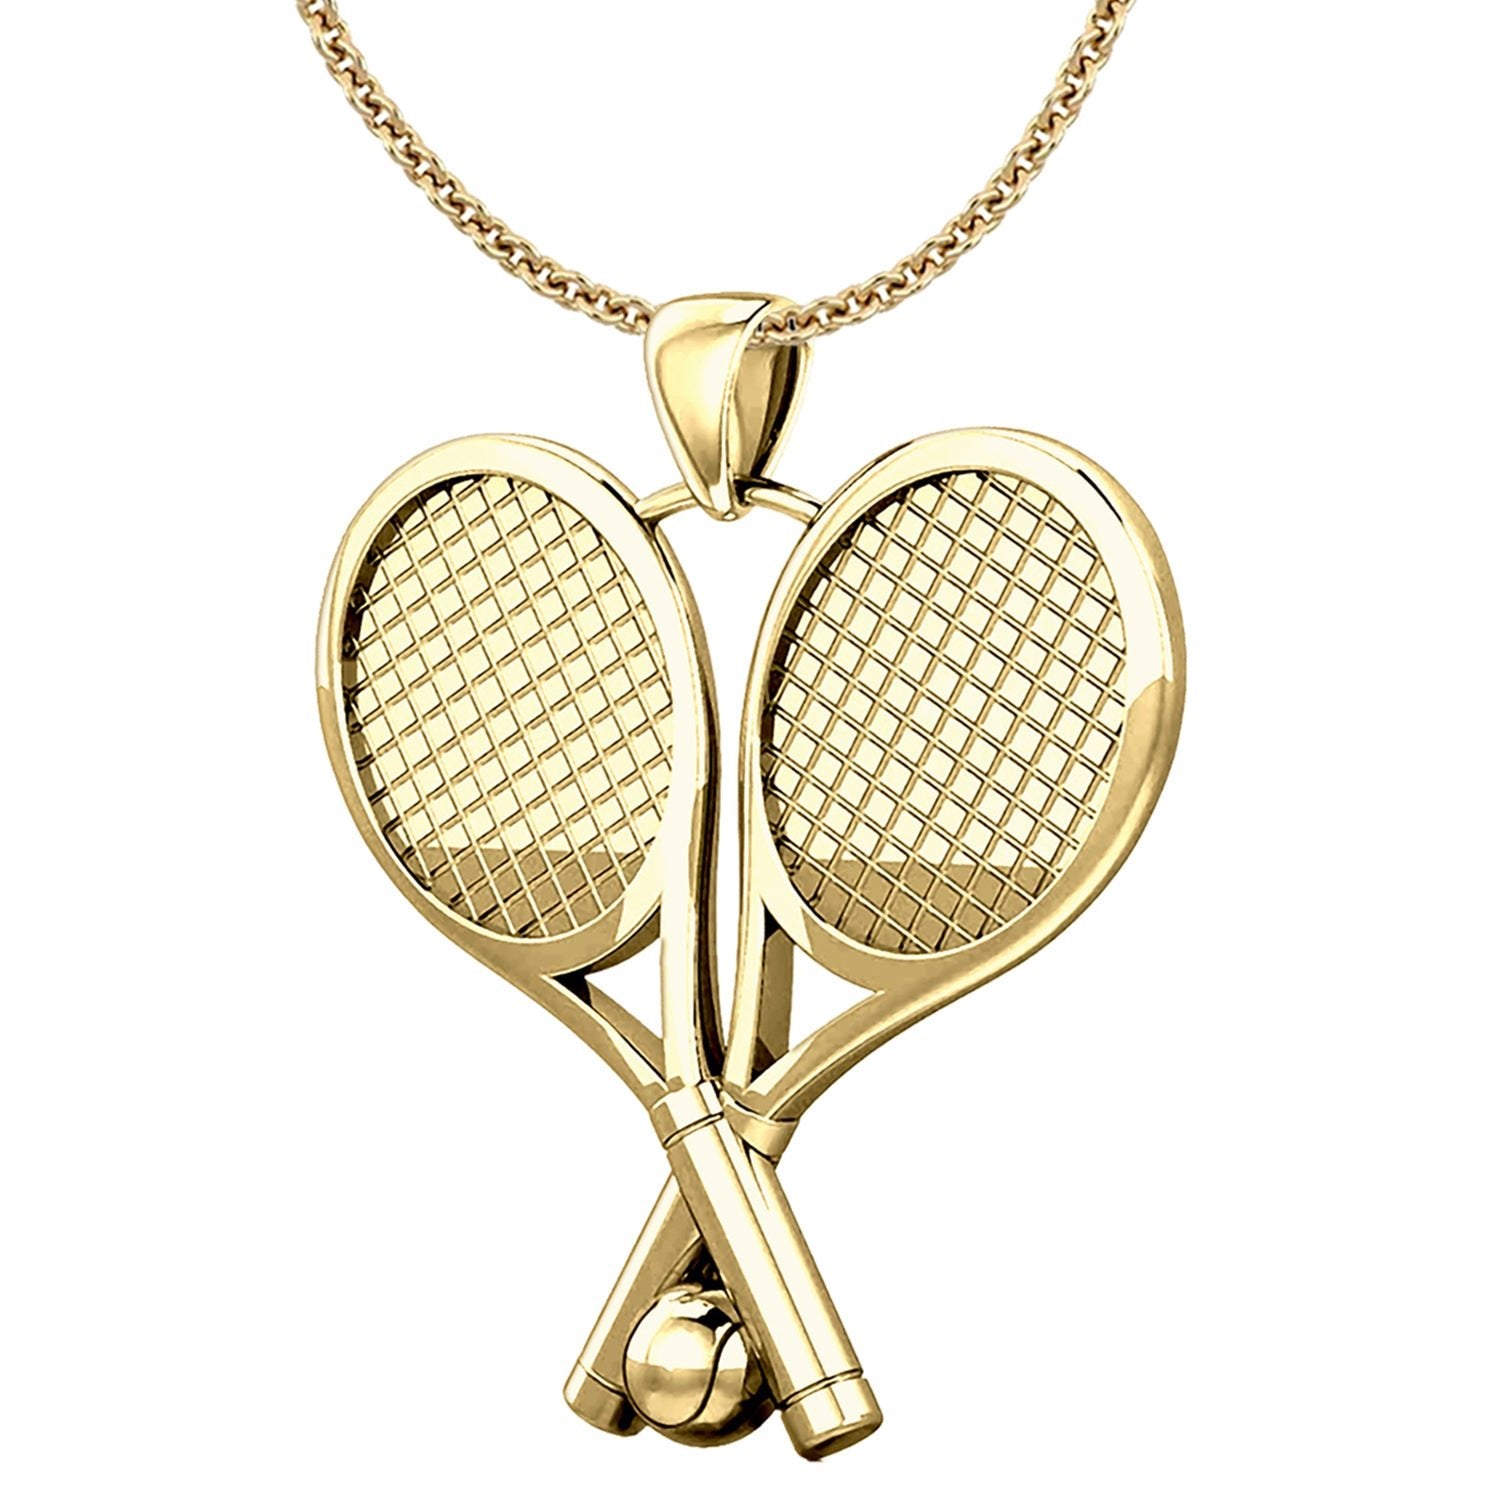 Small 10K or 14K Yellow Gold 3D Double Tennis Racket & Ball Pendant  Necklace, 25mm - 10k Yellow Gold / 18in, 1.5mm Cable Chain